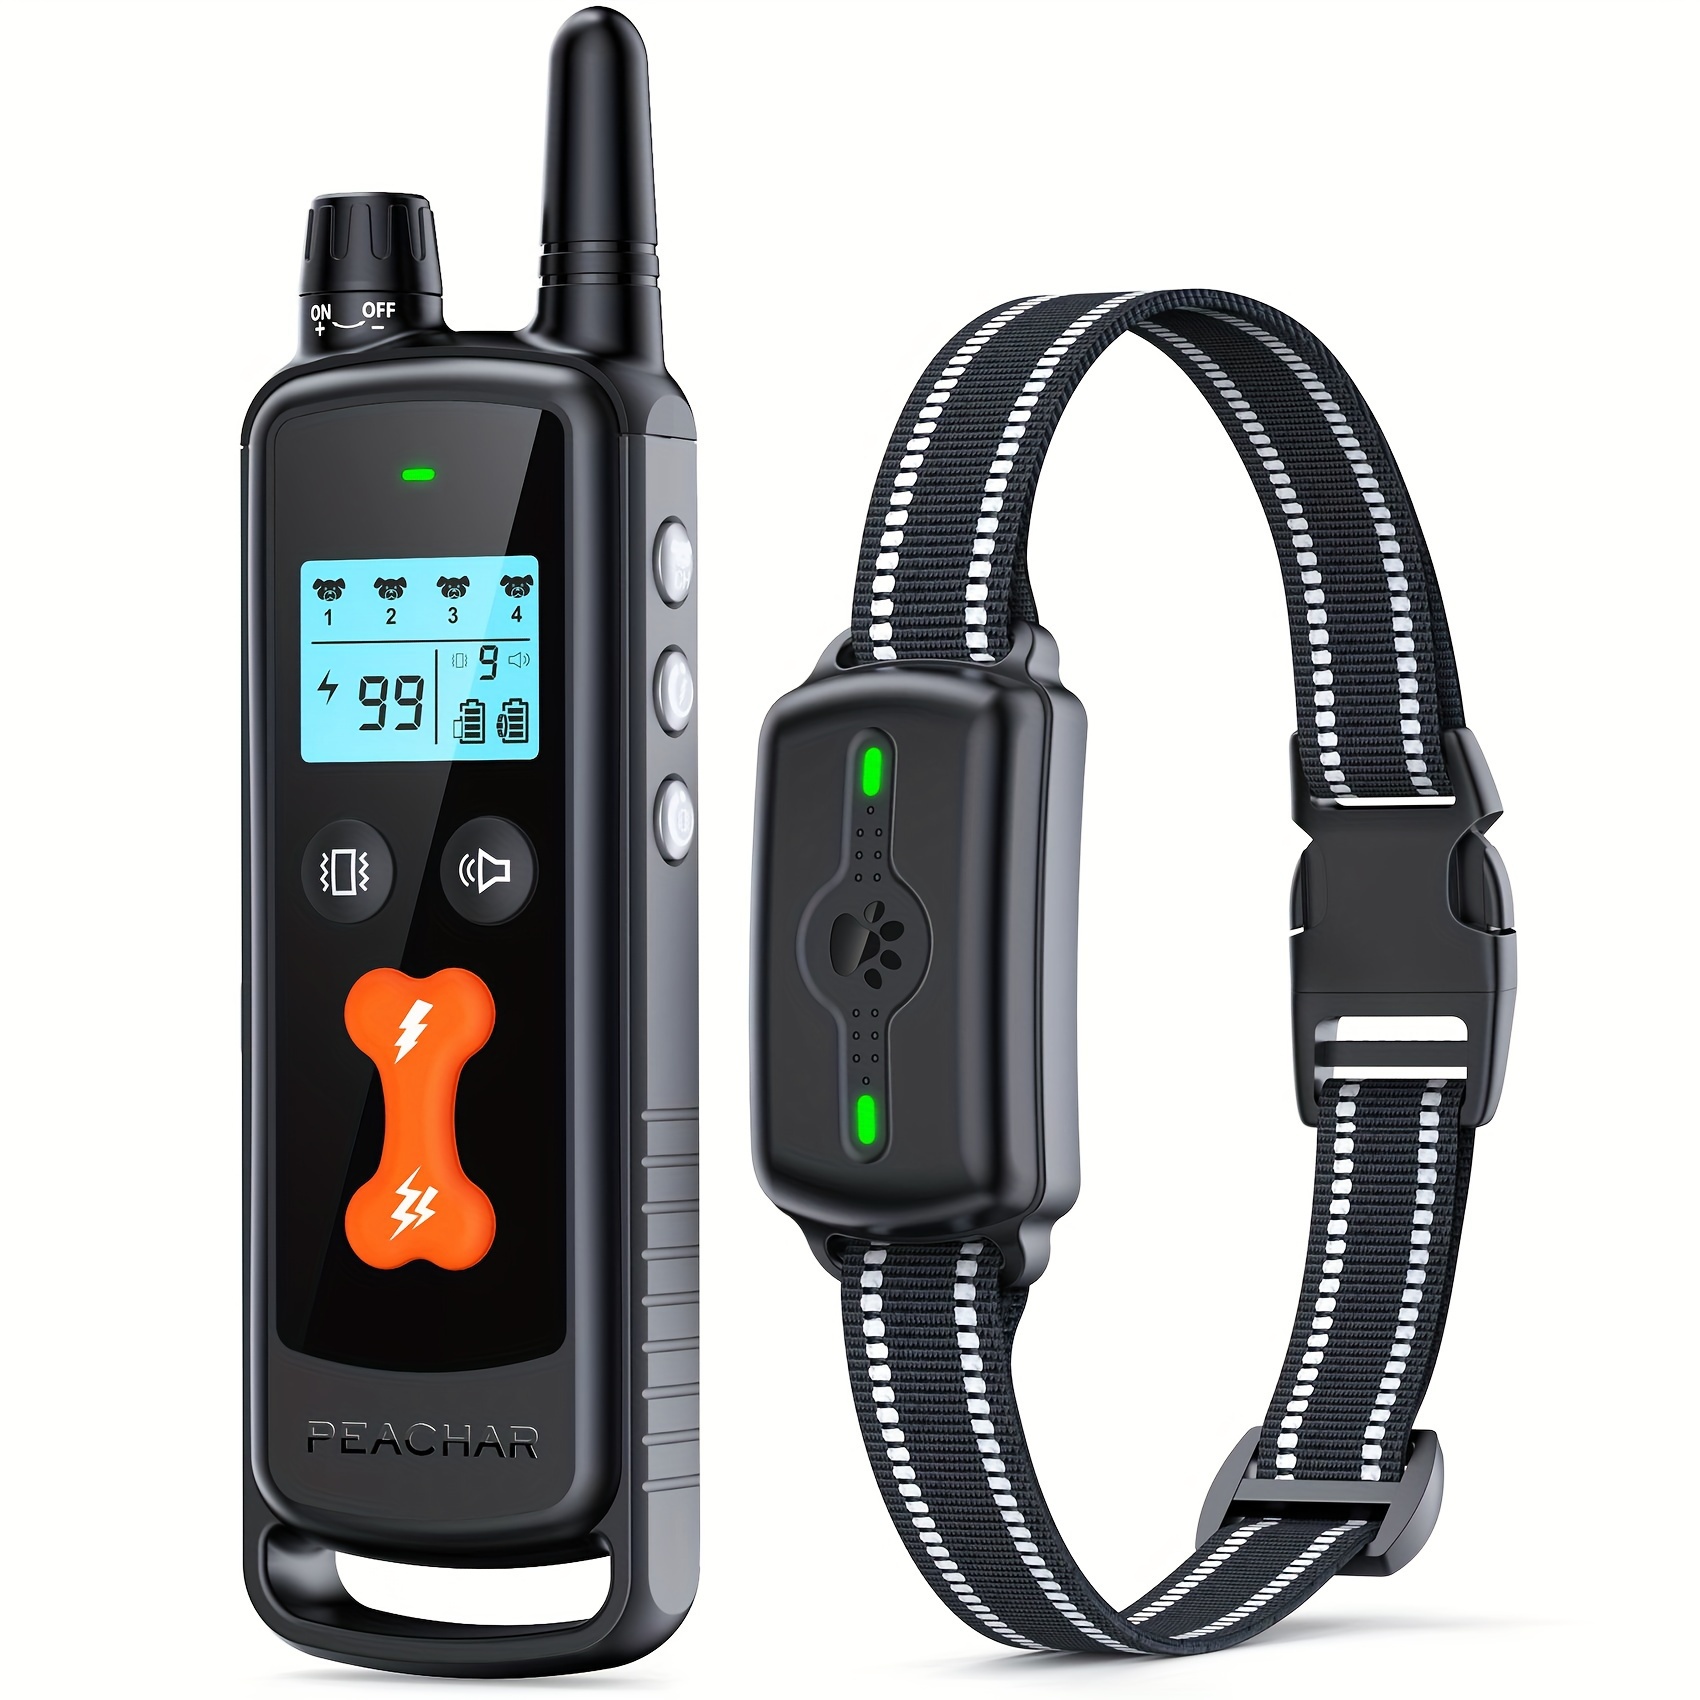 

Dog Shock Collar, Dog Training Collar With 2300ft Remote, Electric Shock Collar With Beep Vibration Shock And Security Lock Mode Rechargeable Shock Collar For Small Large Medium Dog